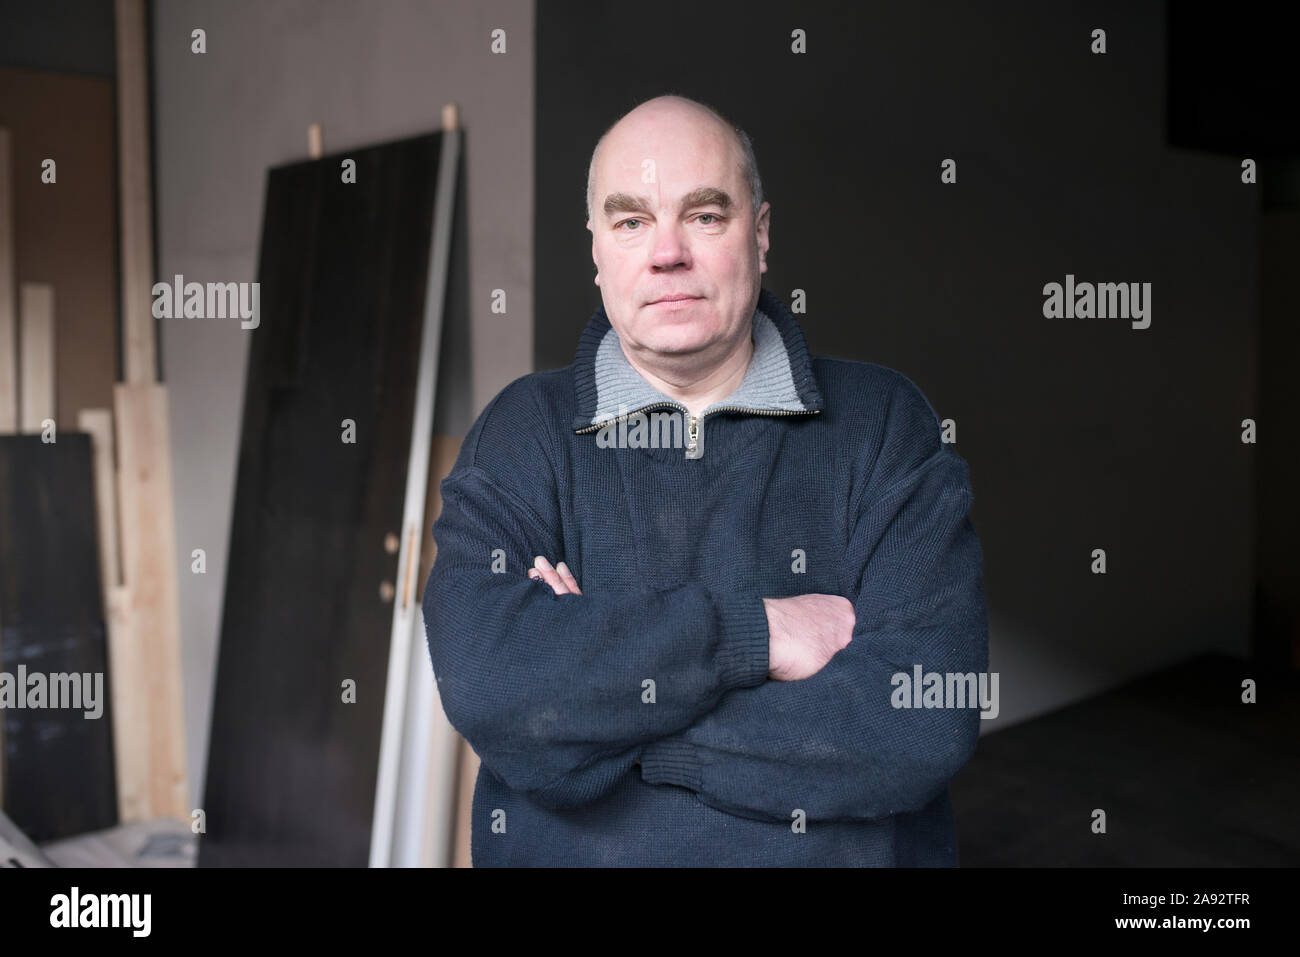 Man on building site Stock Photo